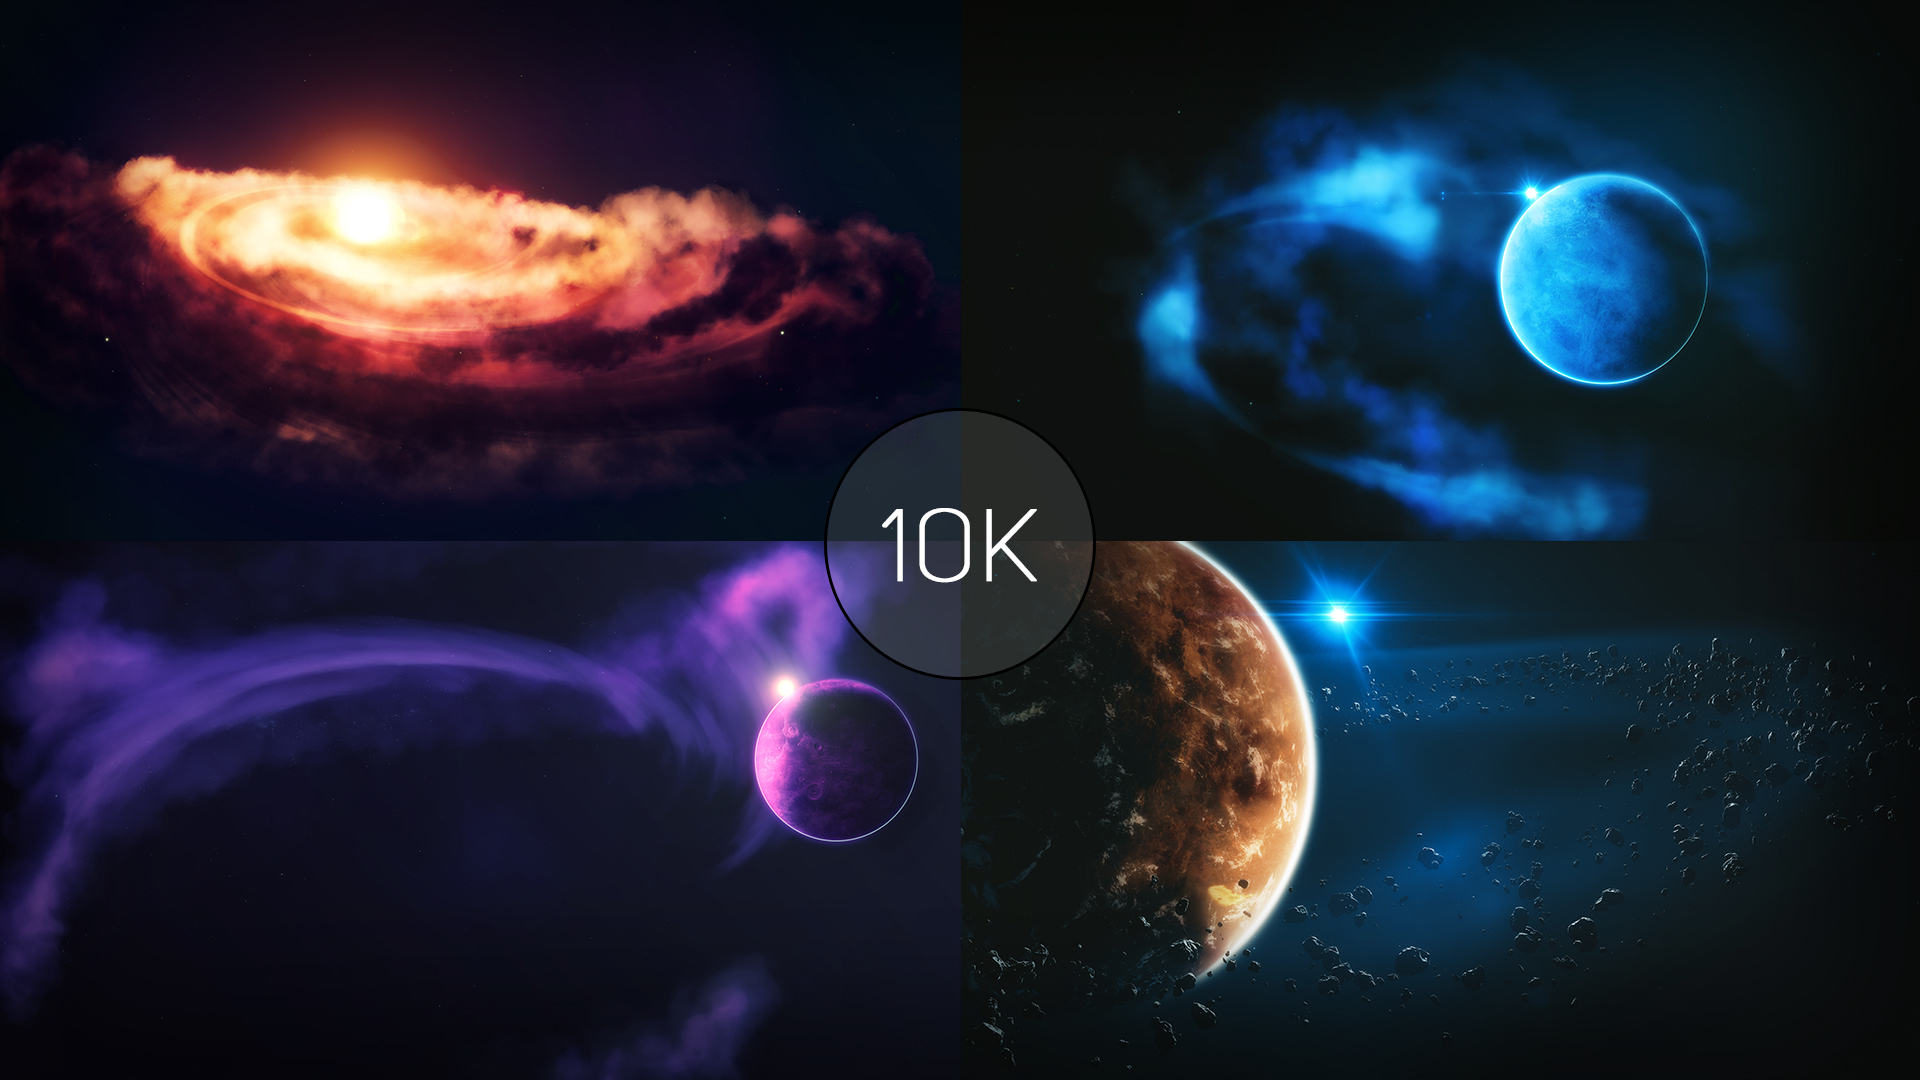 Digital Wallpaper Pack Space  10k Resolution  Release Announcements   itchio